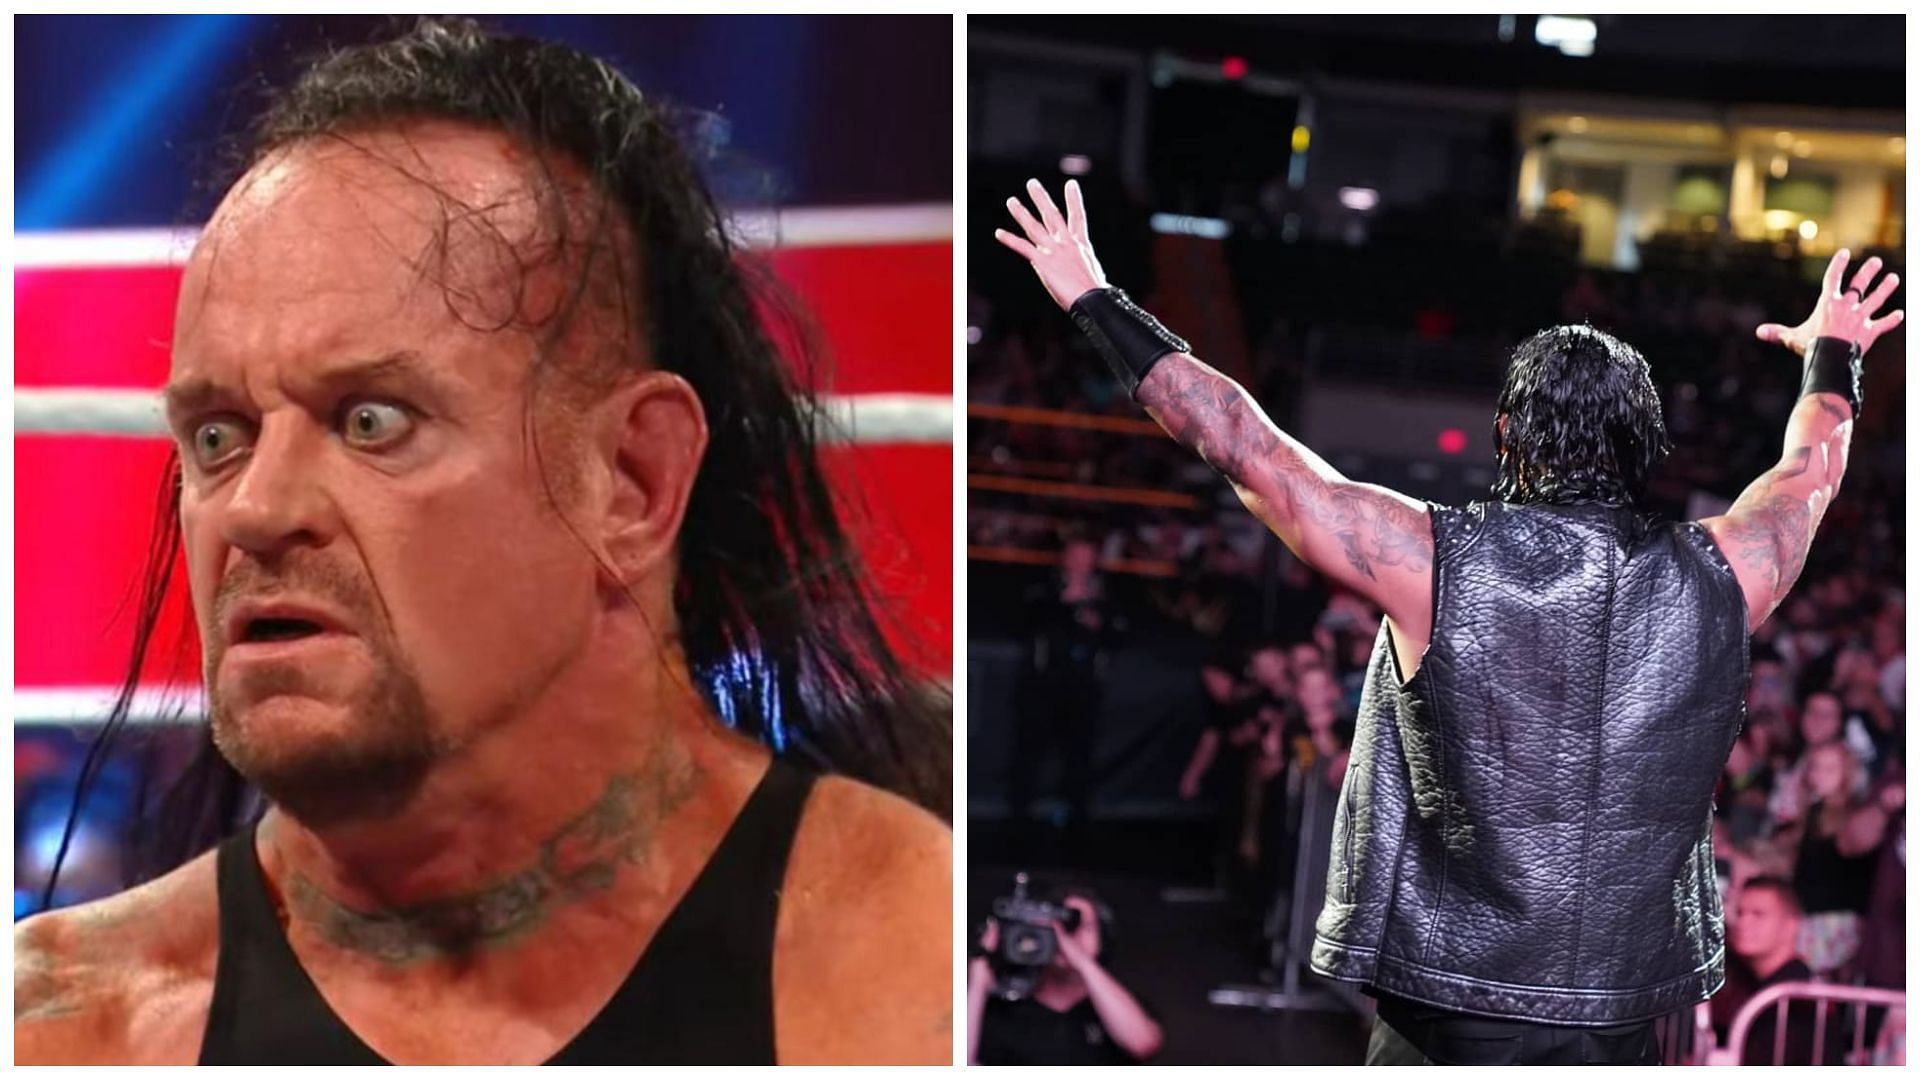 The Undertaker is a WWE Hall of Famer.